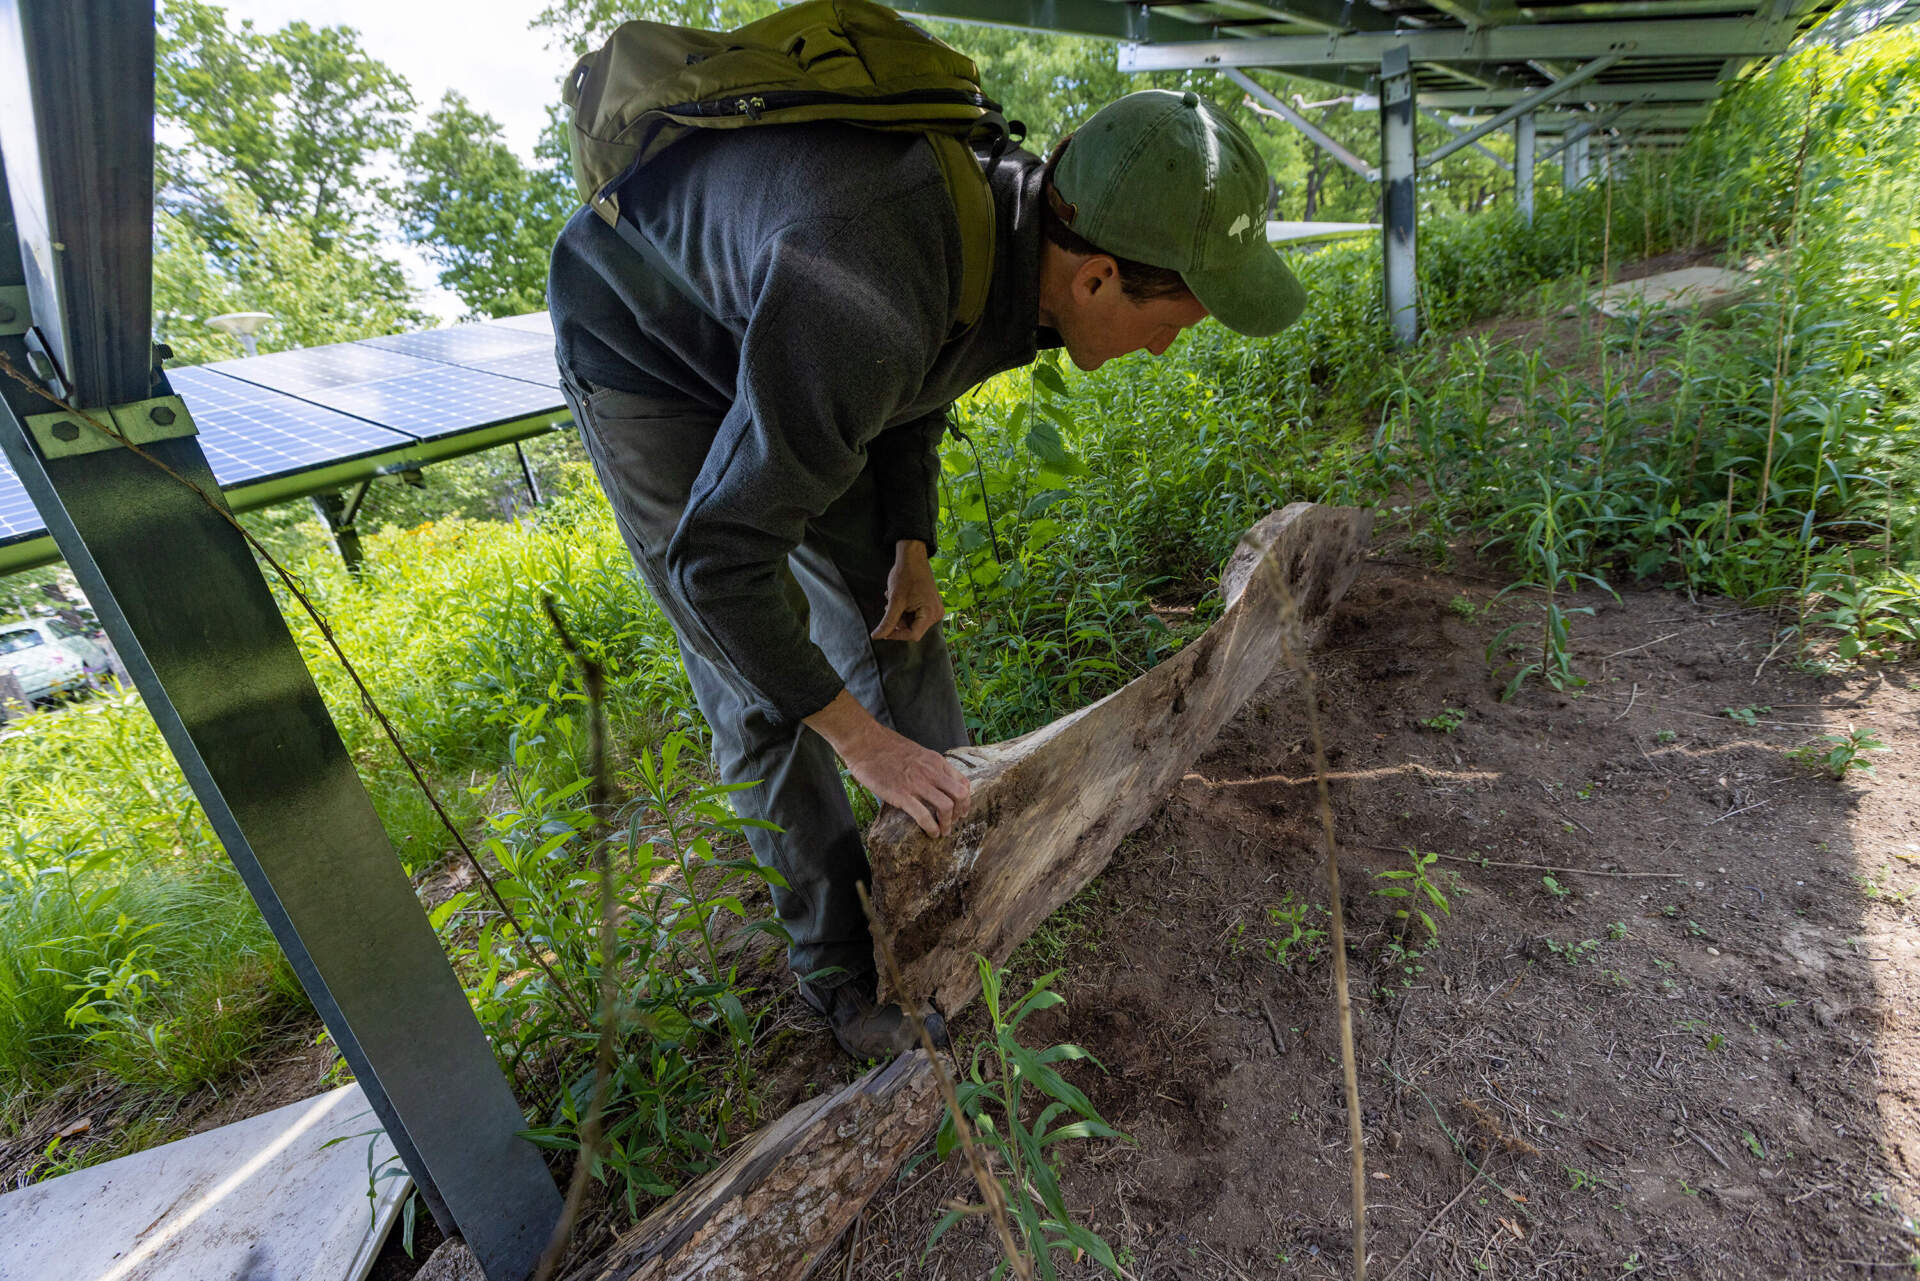 Brendan Keegan, horticultural expert at the Weld Research Building of the Arnold Arboretum, looks for any signs of insect activity under some rotting wood he placed beneath the solar arrays in the pollinator garden. (Jesse Costa/WBUR)